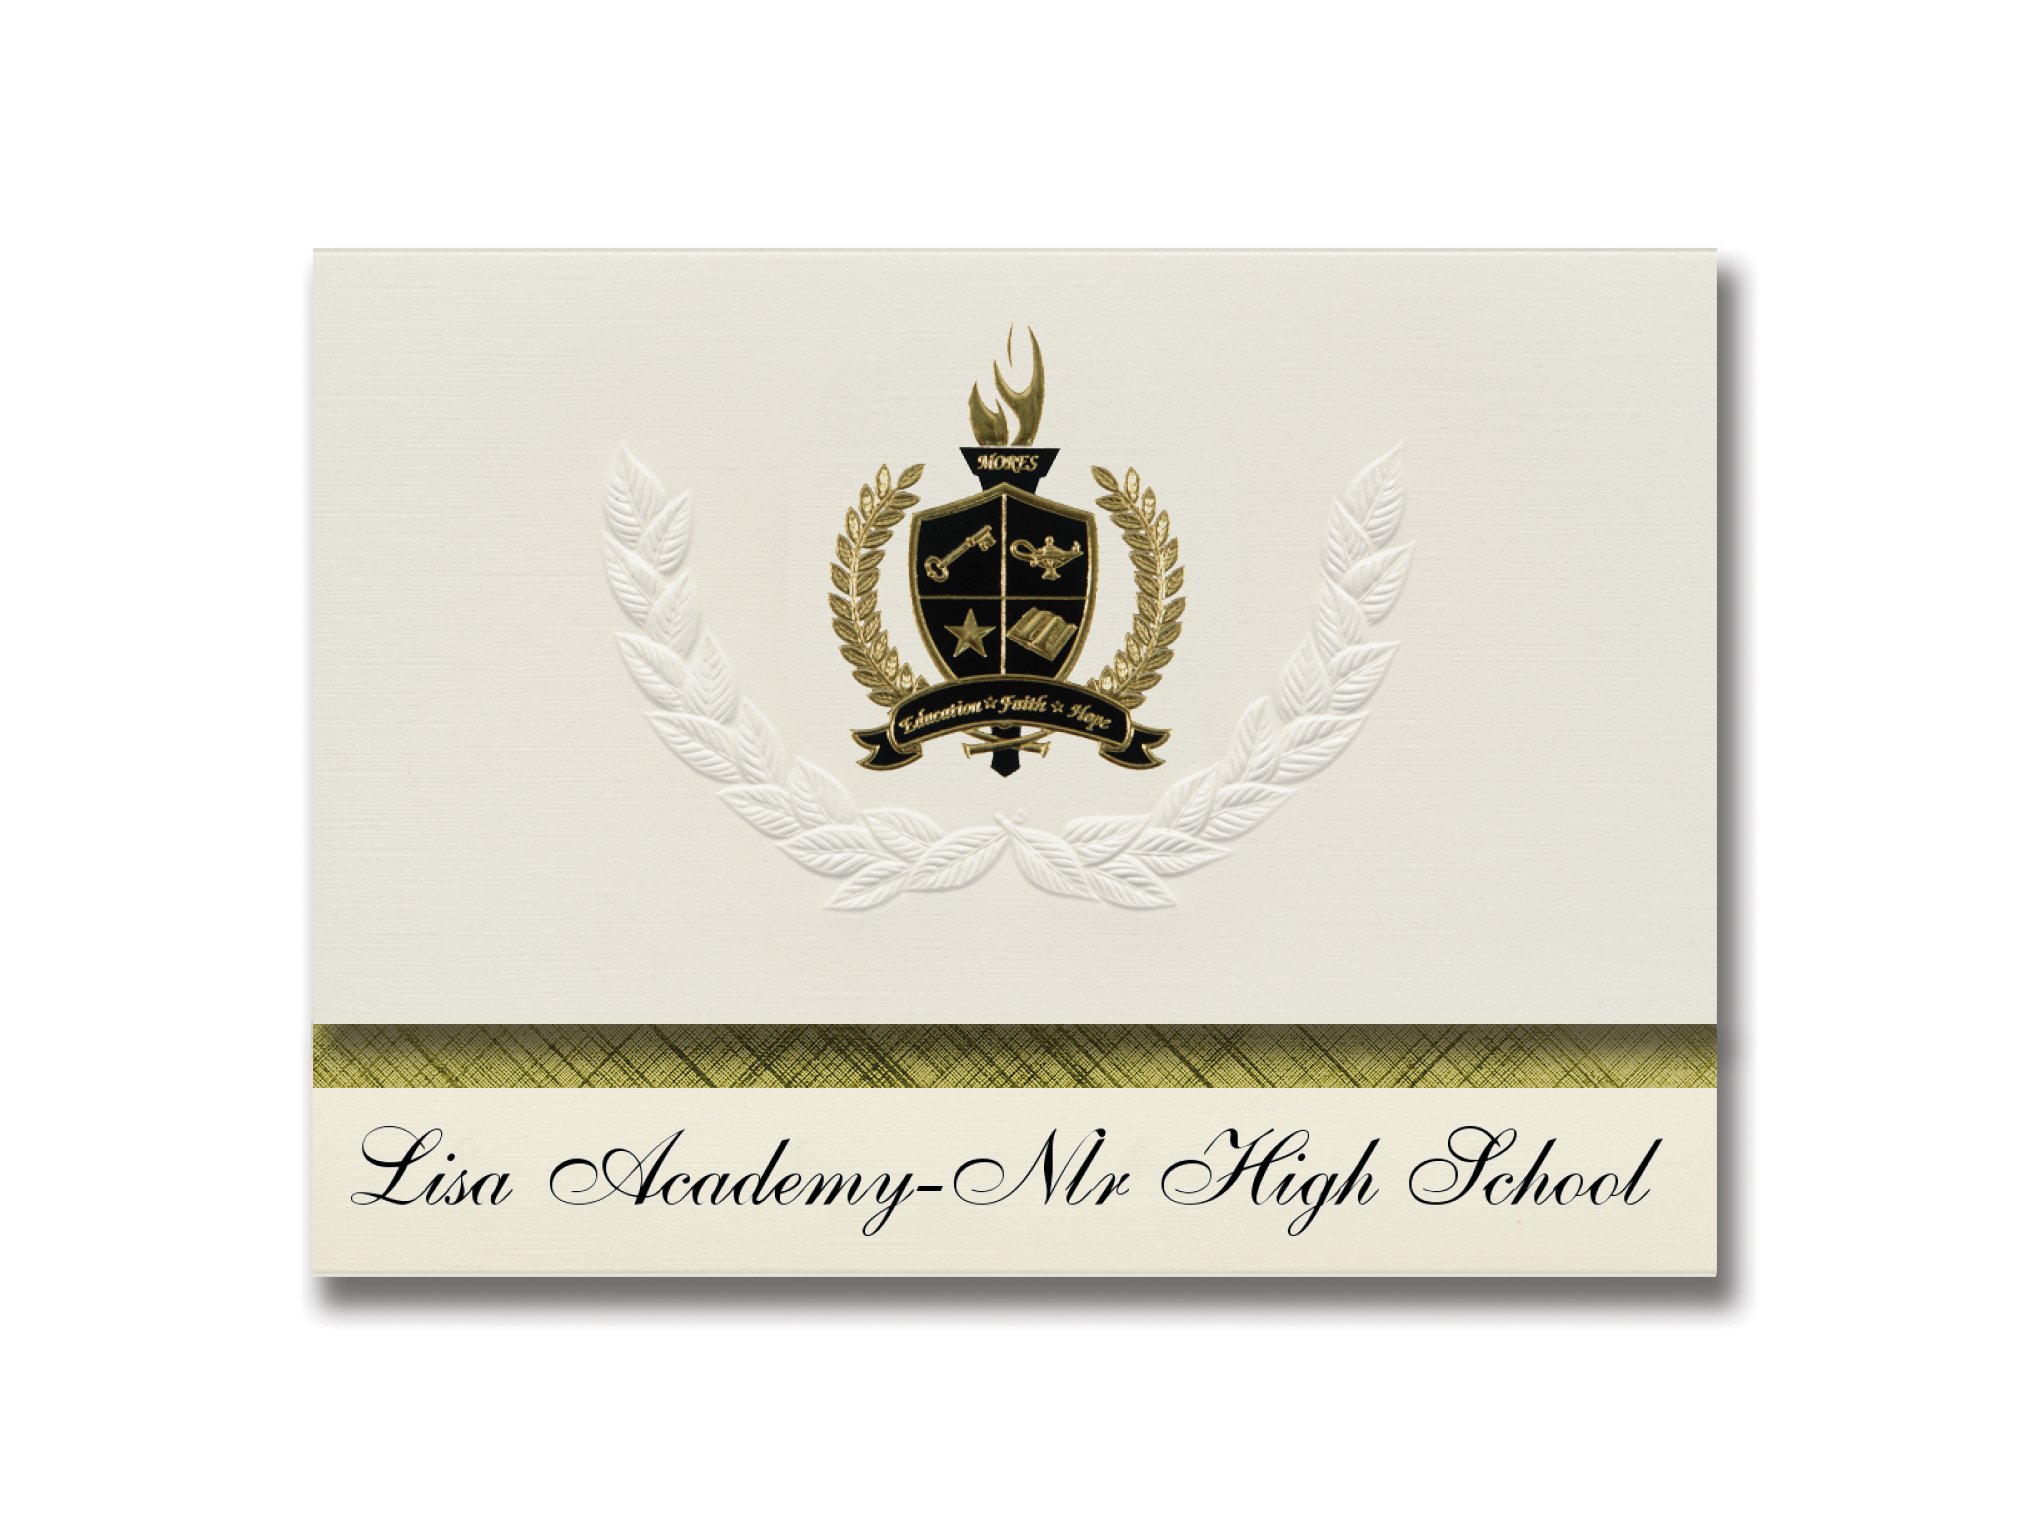 Signature Announcements Lisa Academy-Nlr High School (Sherwood, AR) Graduation Announcements, Presidential style, Basic package of 25 with Gold & B...